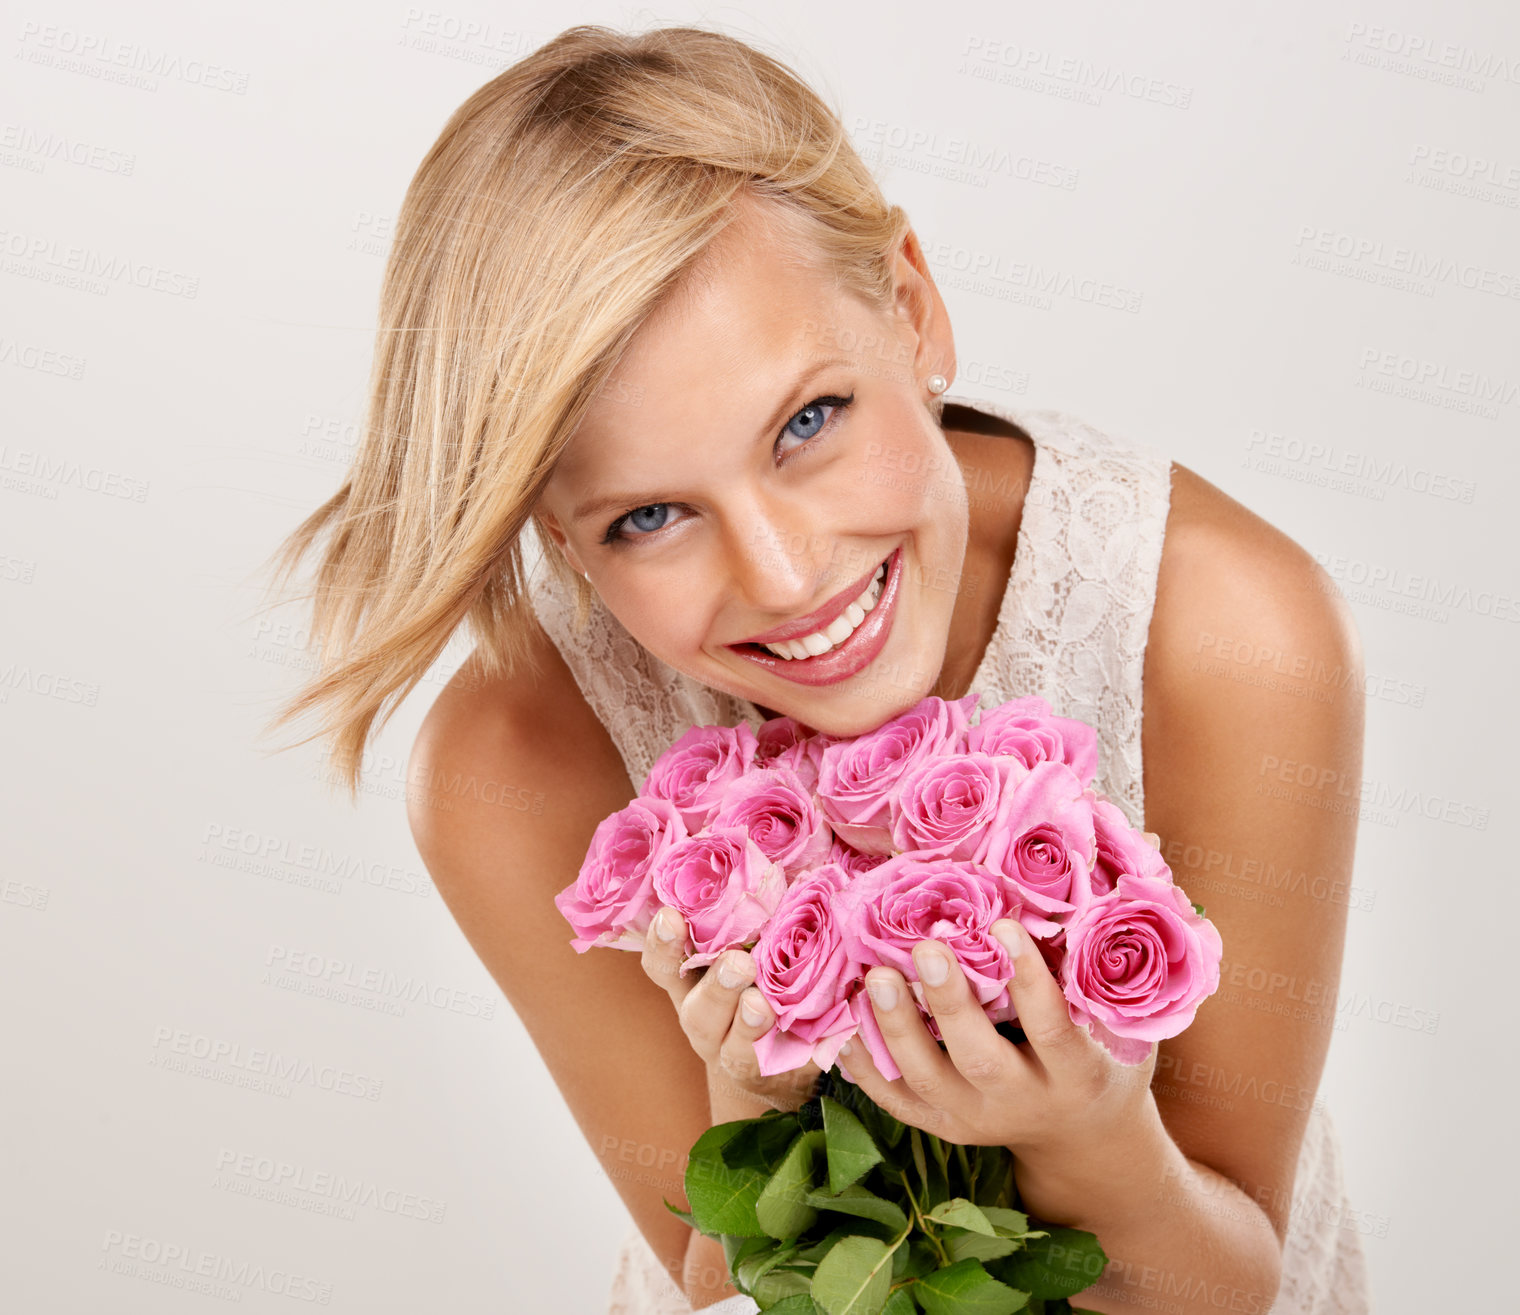 Buy stock photo Portrait of an attractive young woman holding a bouquet of flowers